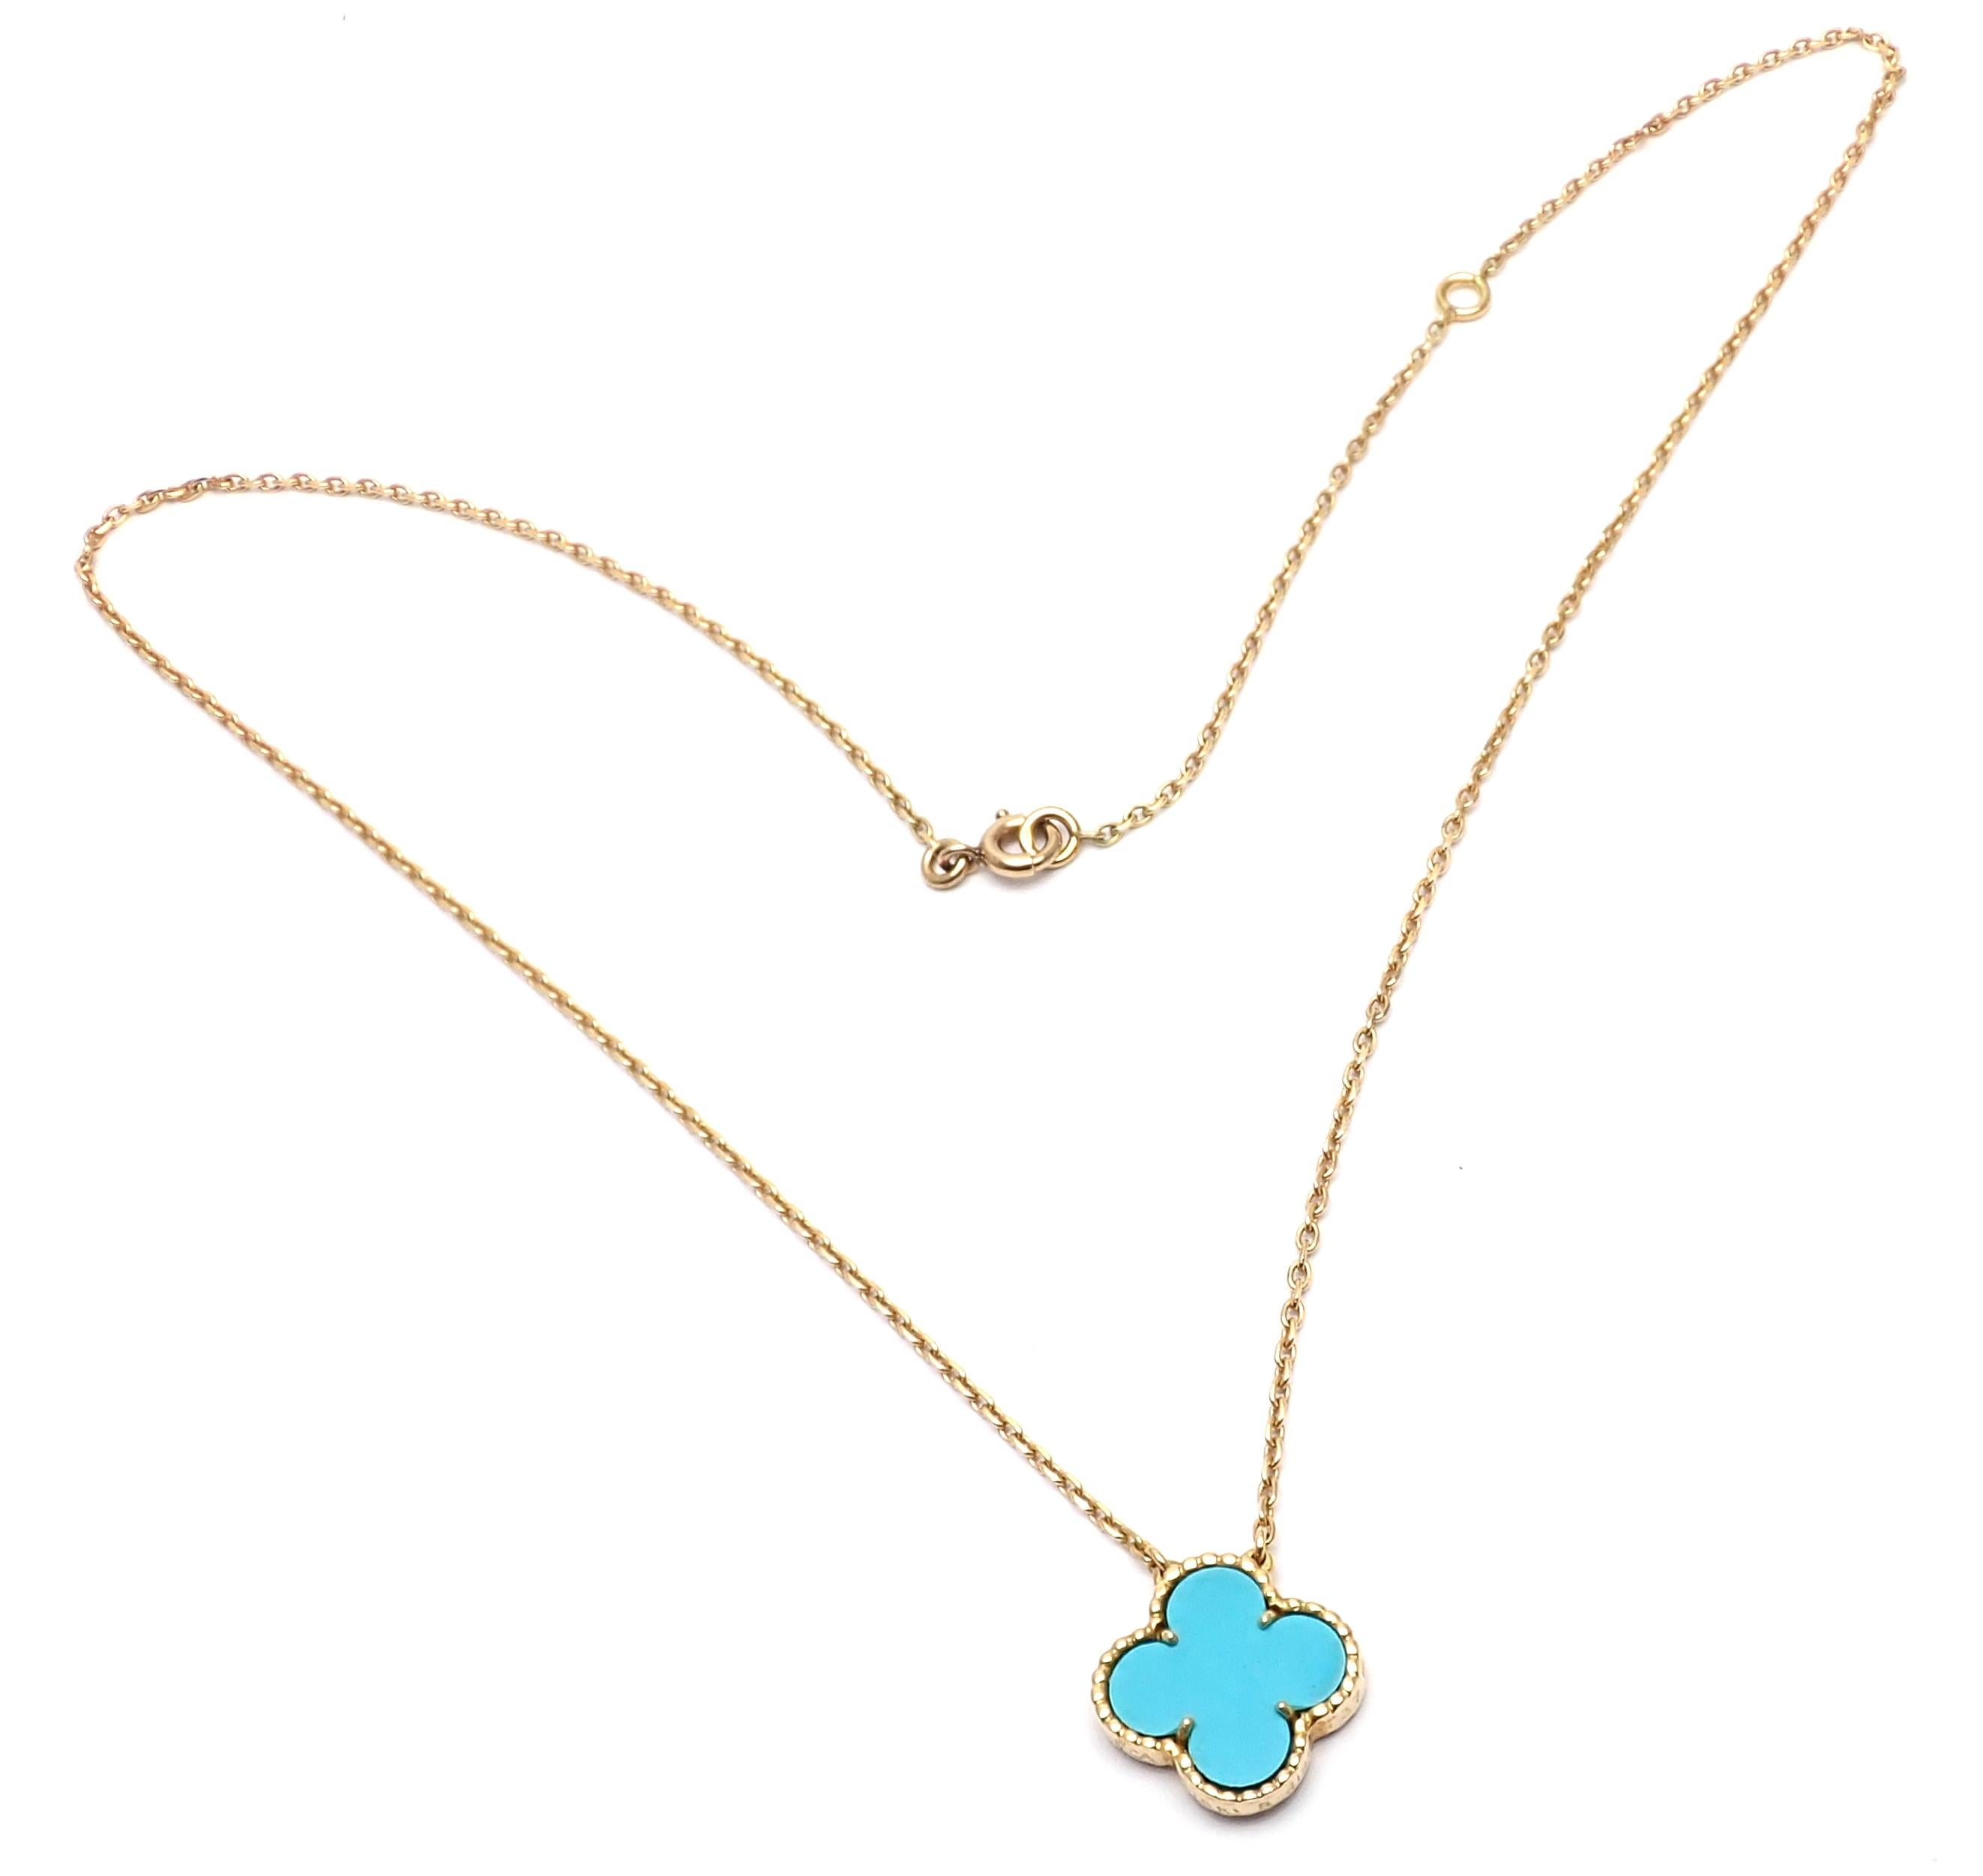 18k Yellow Gold Vintage Alhambra Turquoise Pendant Necklace by Van Cleef & Arpels. 
This necklace comes with VCA service paper from VCA stone and a box.
With one 15mm motif of turquoise alhambra stone.
Details: 
Length: 17